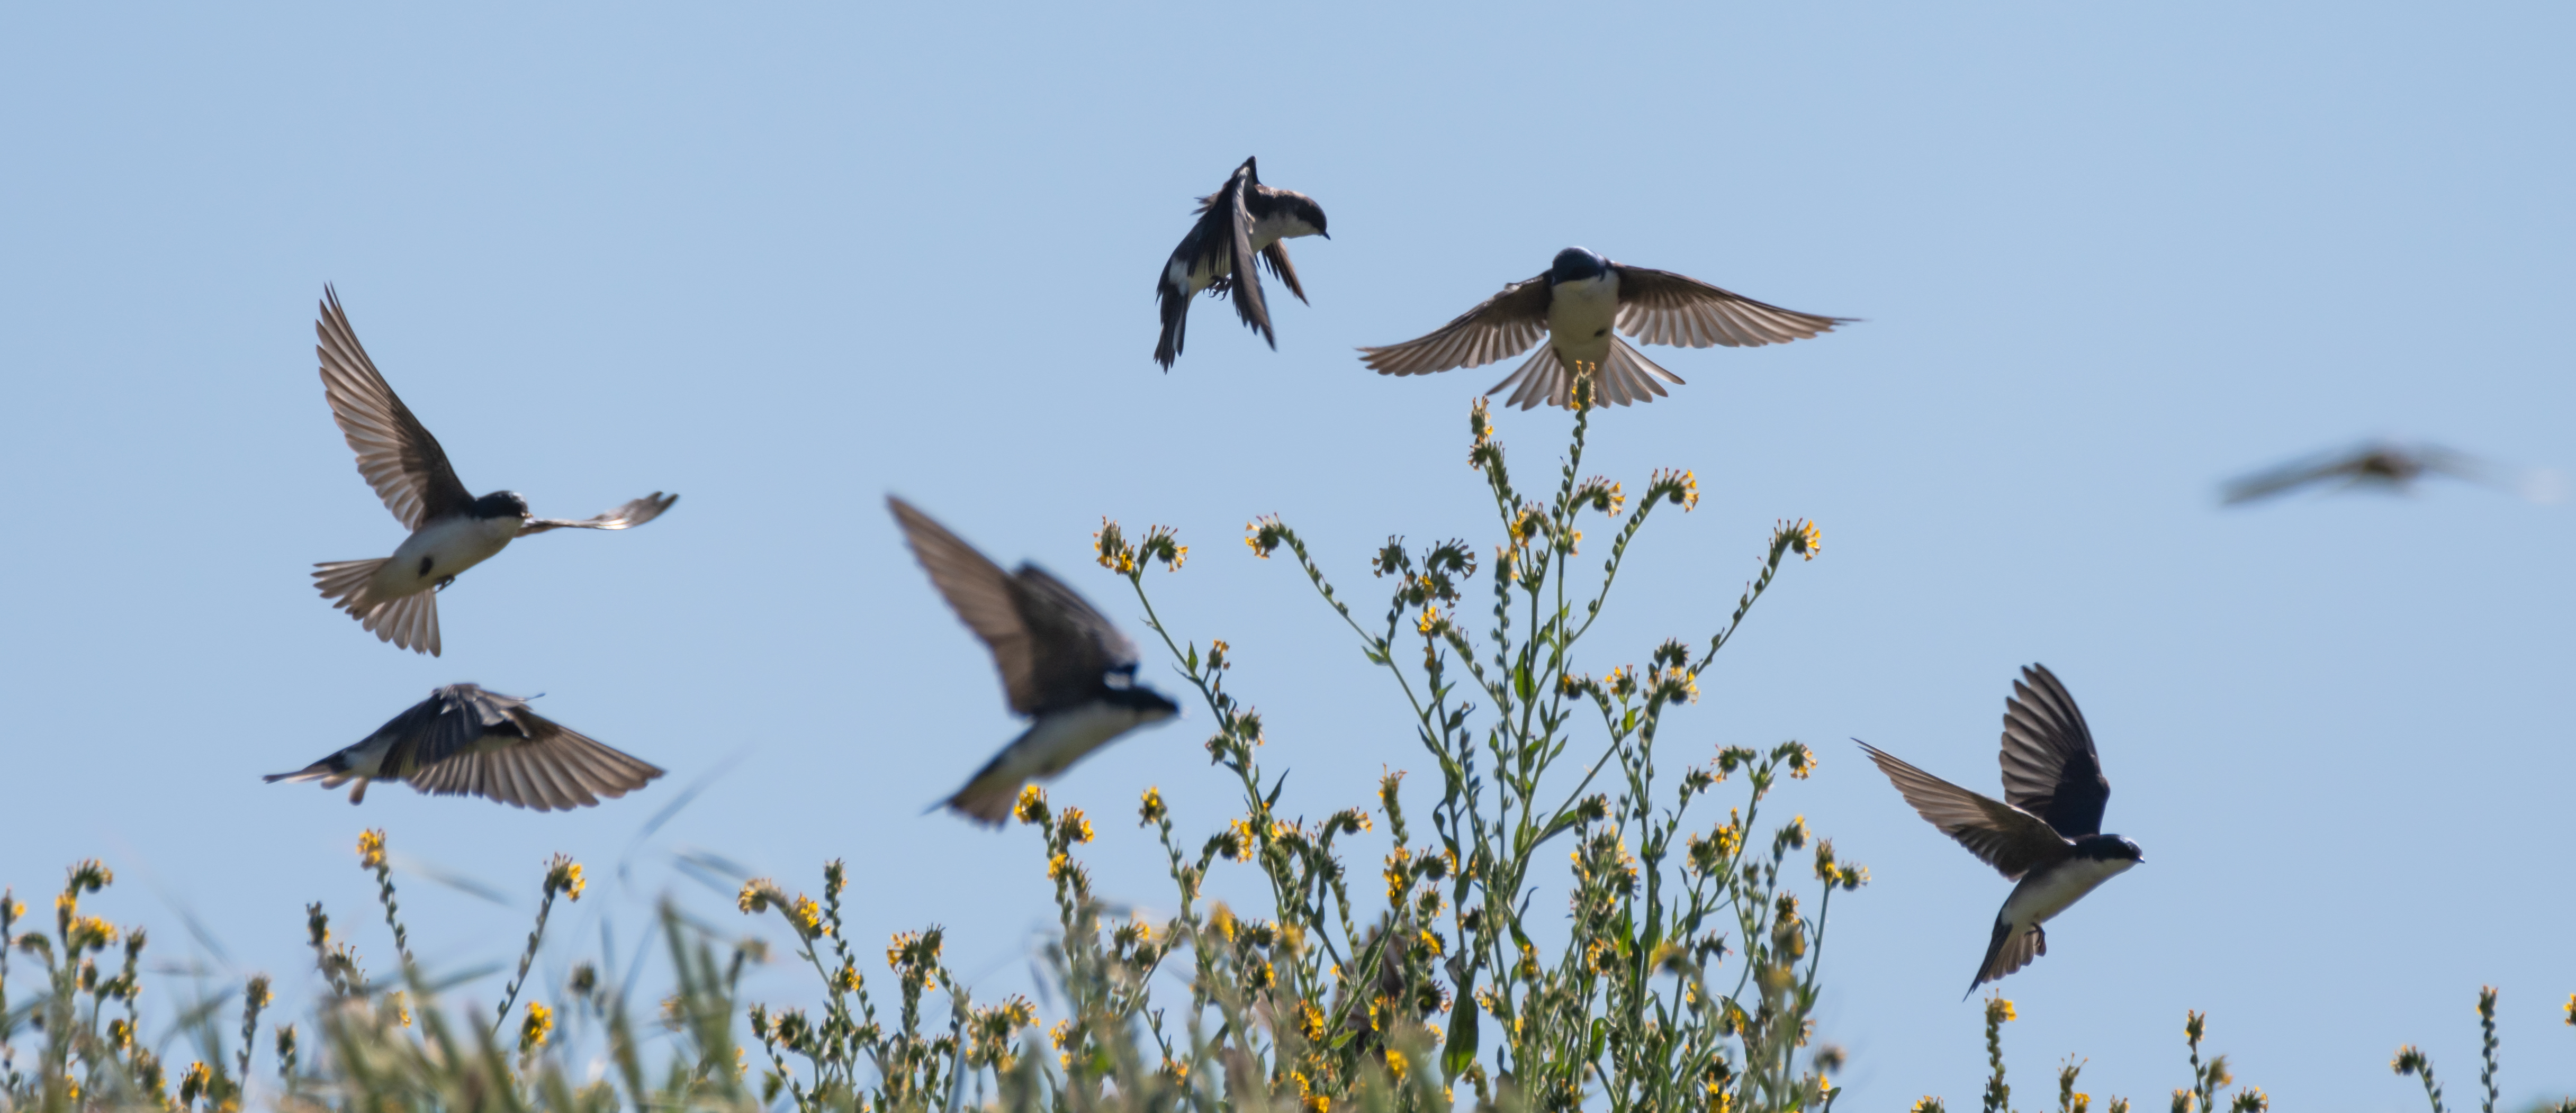 Tree Swallows gather during migration. Photo: Wendy Miller/<a href="https://creativecommons.org/licenses/by-nd/2.0/" target="_blank" >CC BY-ND 2.0</a>